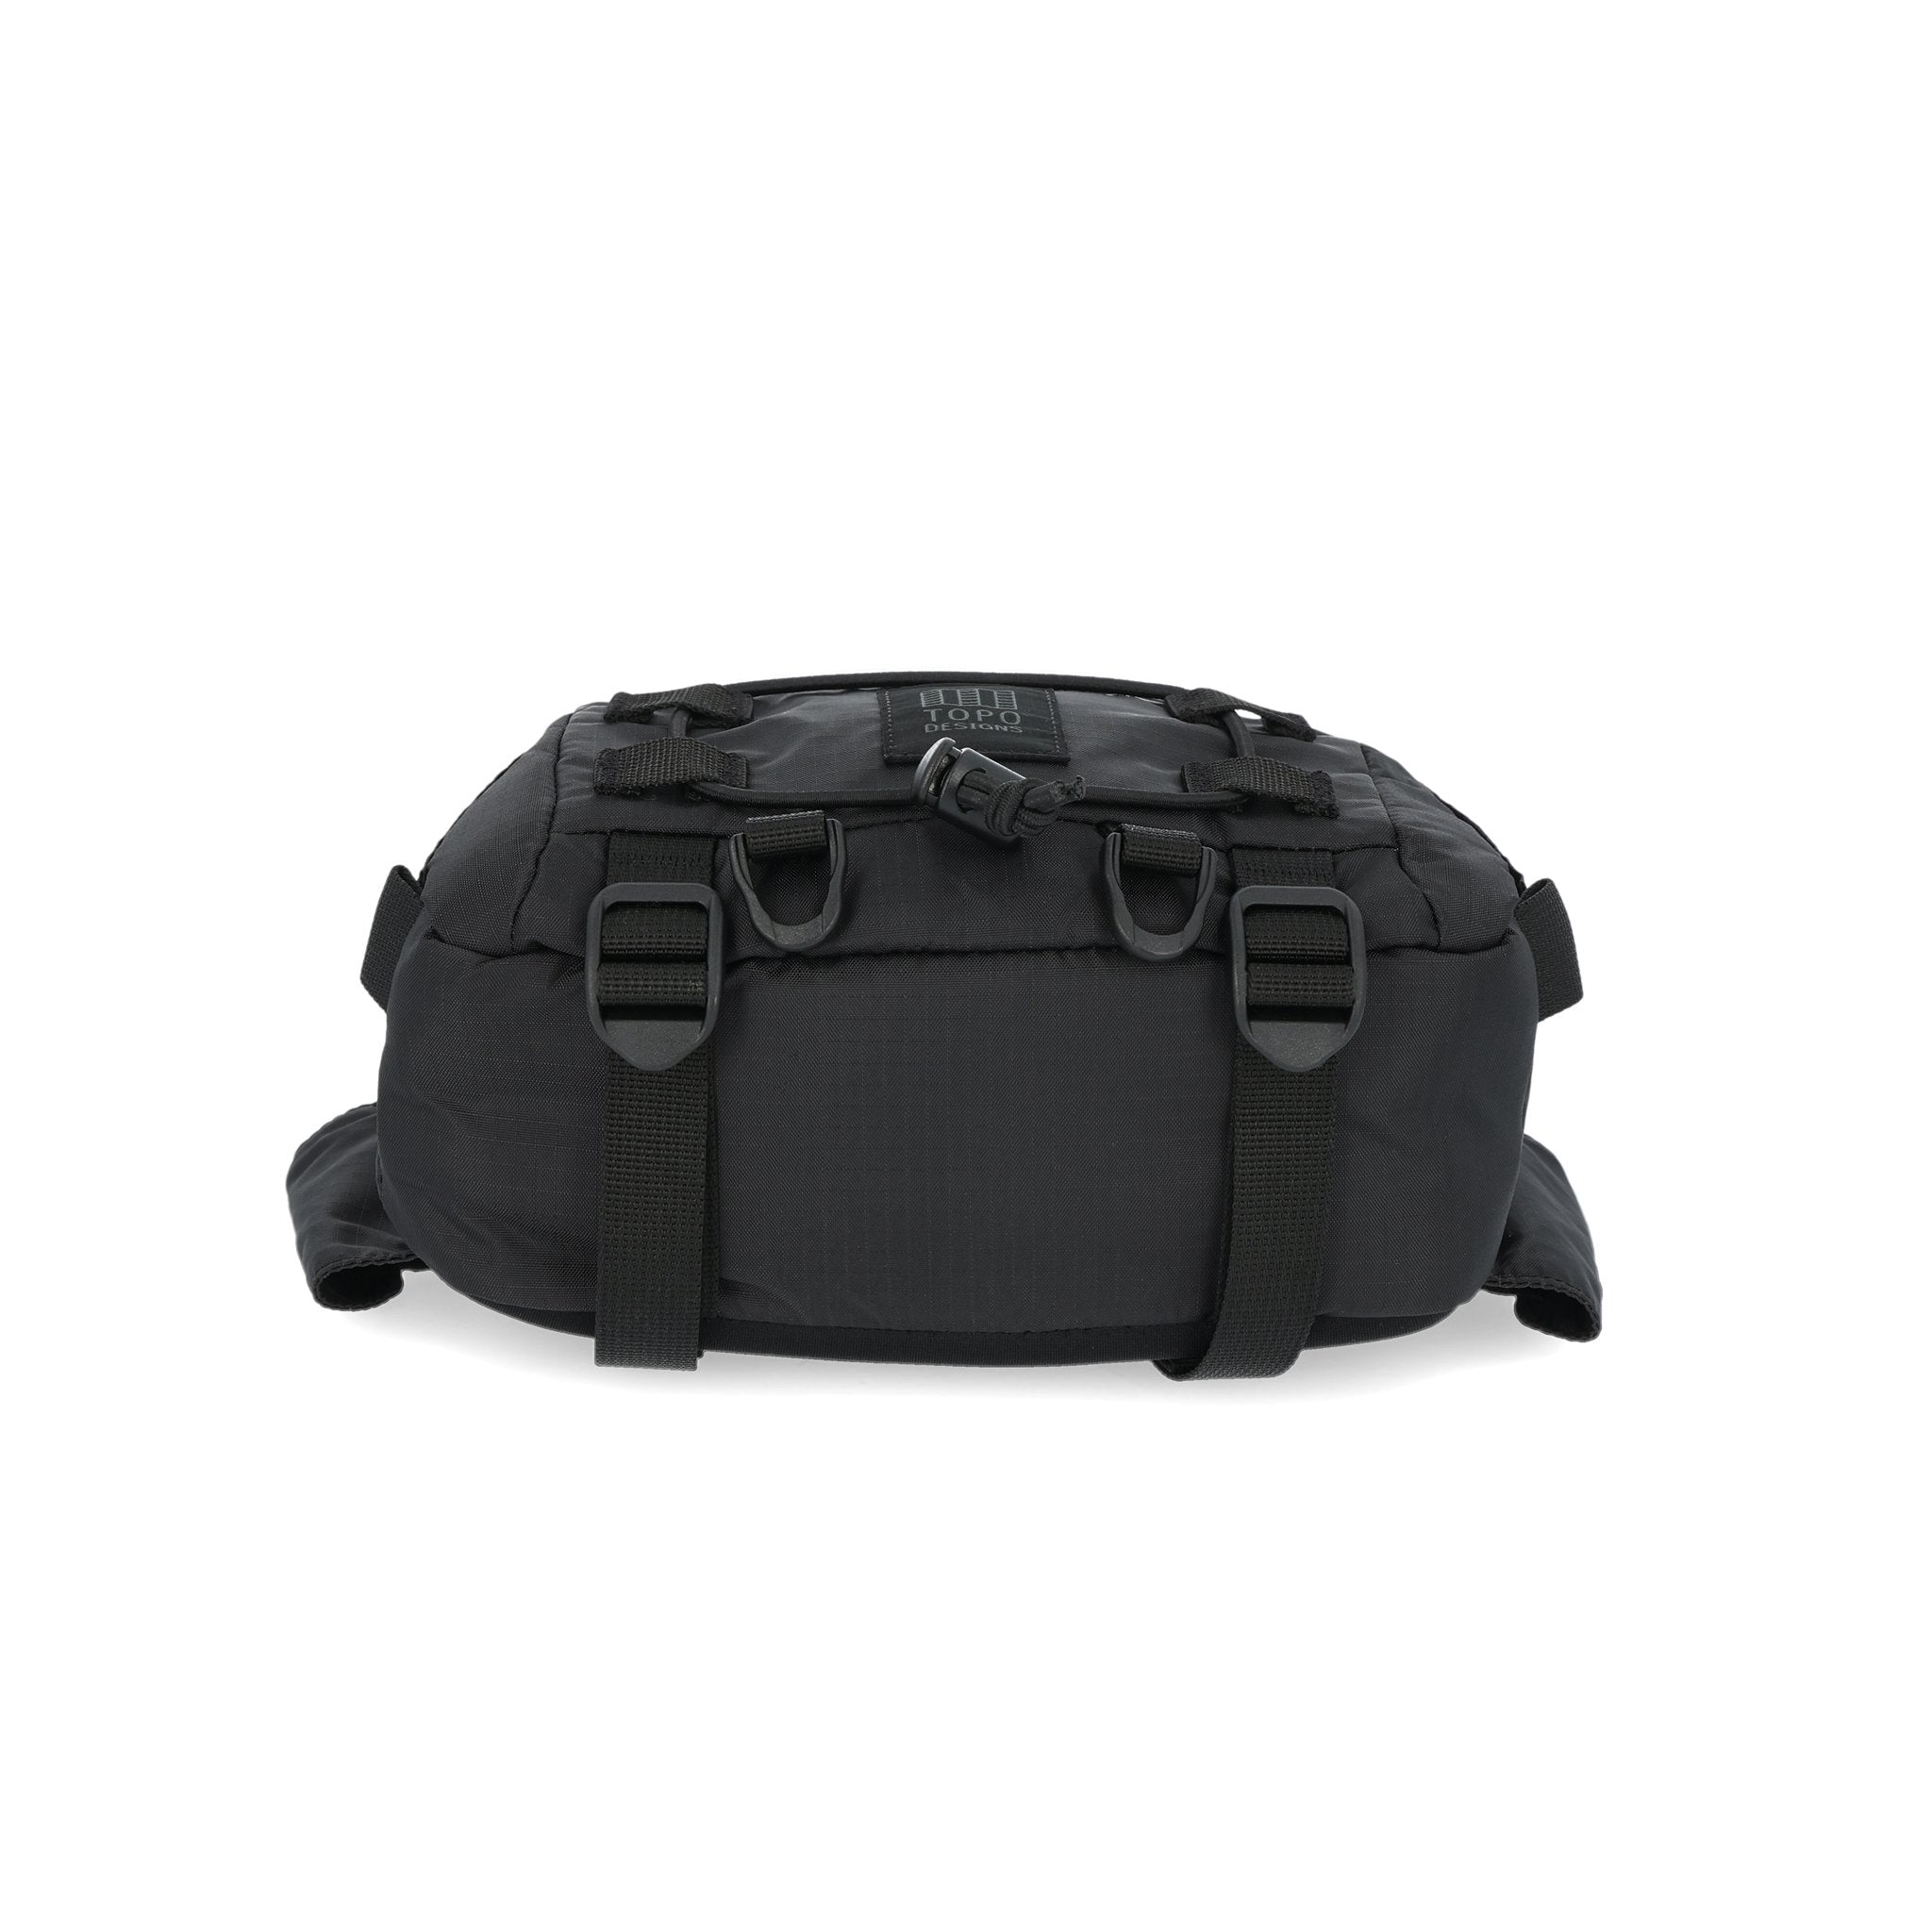 Bottom compression straps on Topo Designs Mountain Hip Pack lumbar bum bag in Black.